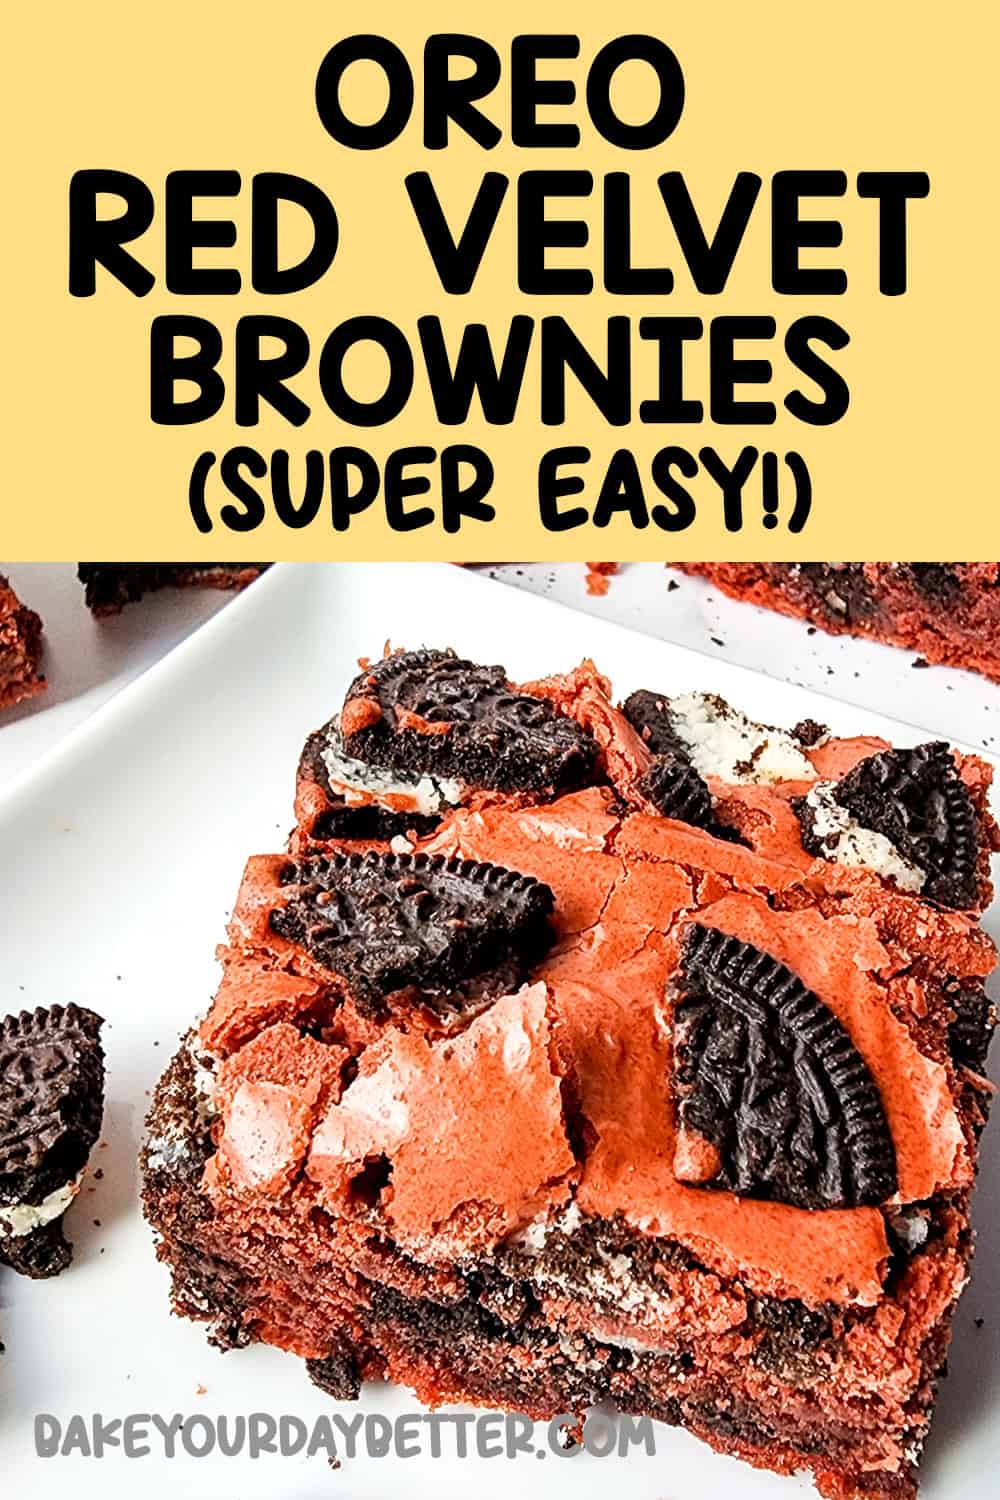 picture of oreo red velvet brownie on plate with text overlay that says: oreo red velvet brownies super easy!